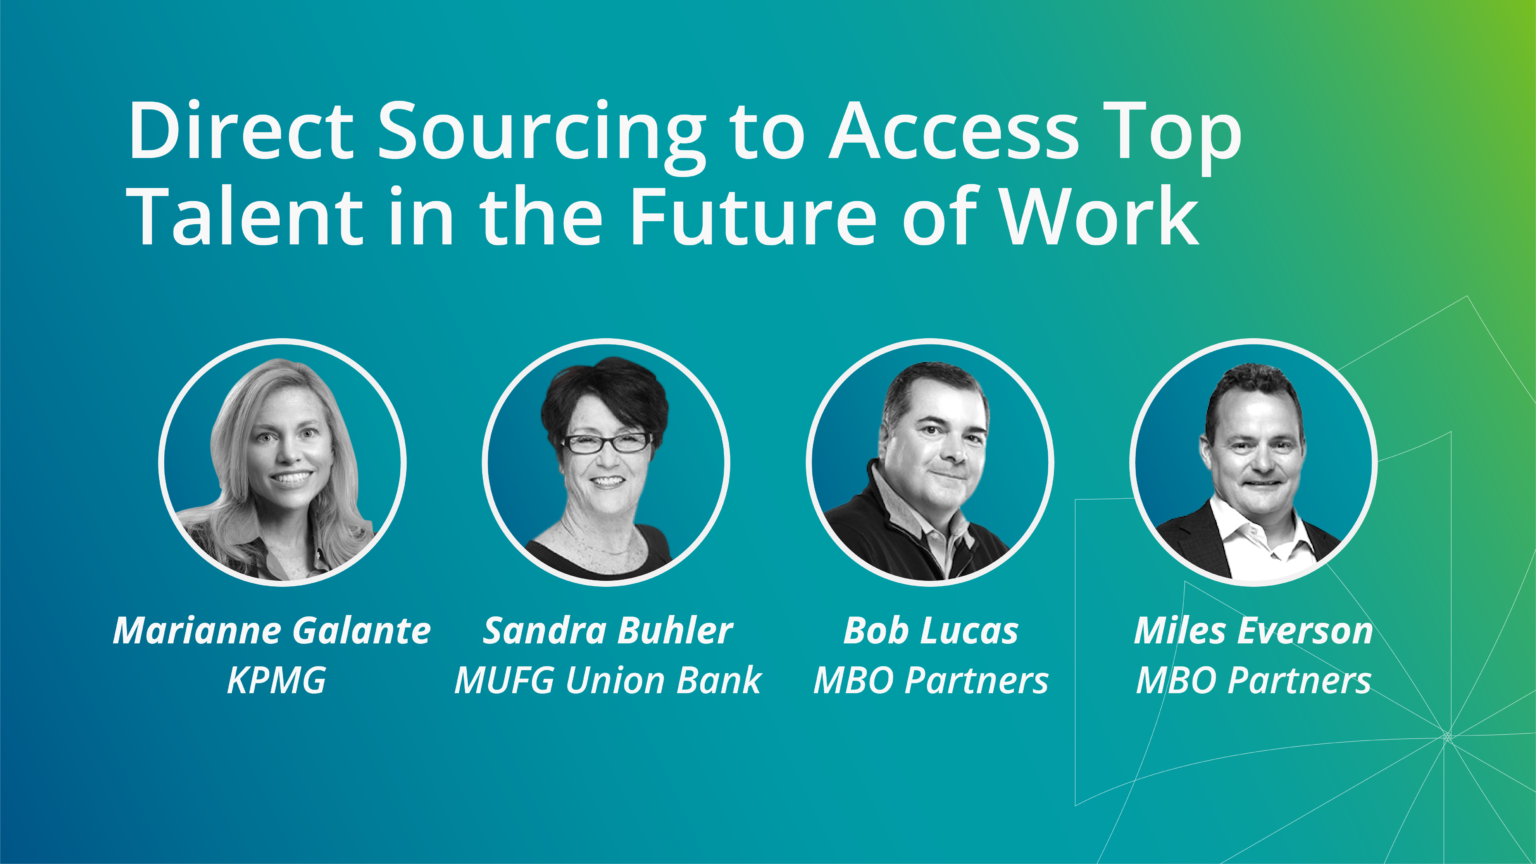 Direct-Sourcing-to-Access-Top-Talent-in-the-Future-of-Work